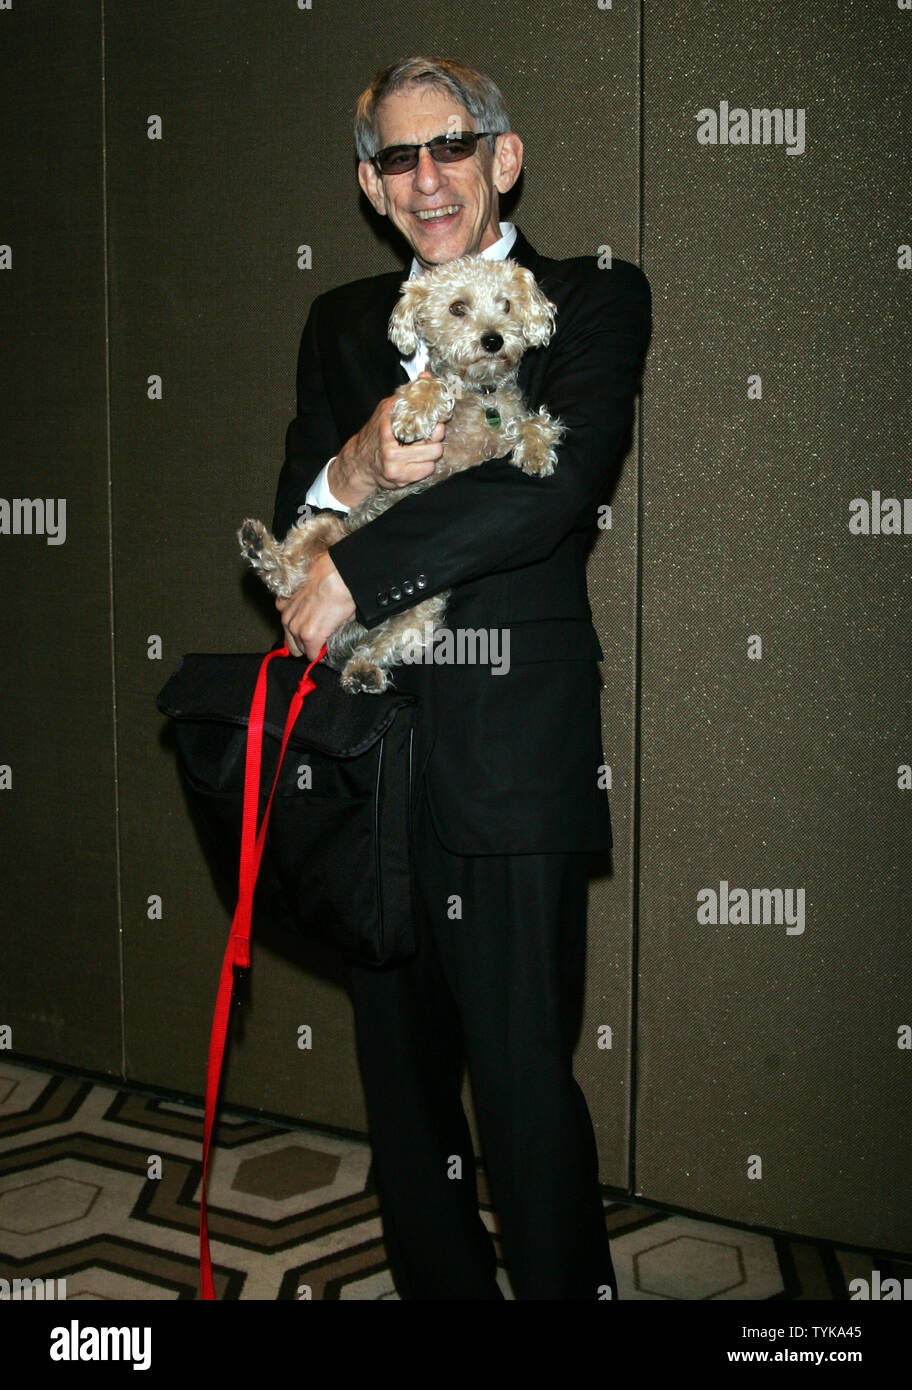 Richard Belzer arrives for the premiere of 'Five Minutes of Heaven'' at the Tribeca Grand Hotel in New York on August 11, 2009.       UPI Photo/Laura Cavanaugh Stock Photo